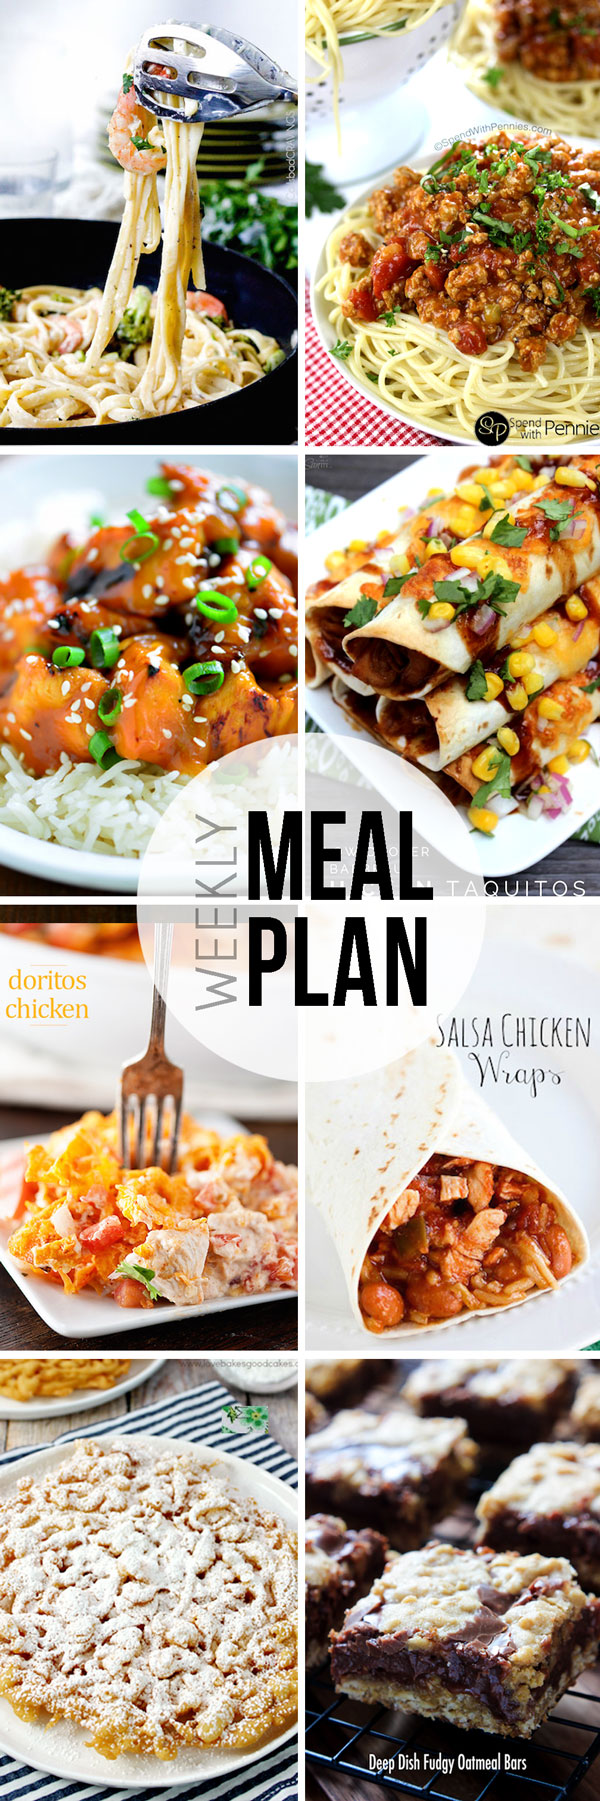 Easy Meal Plan #7.